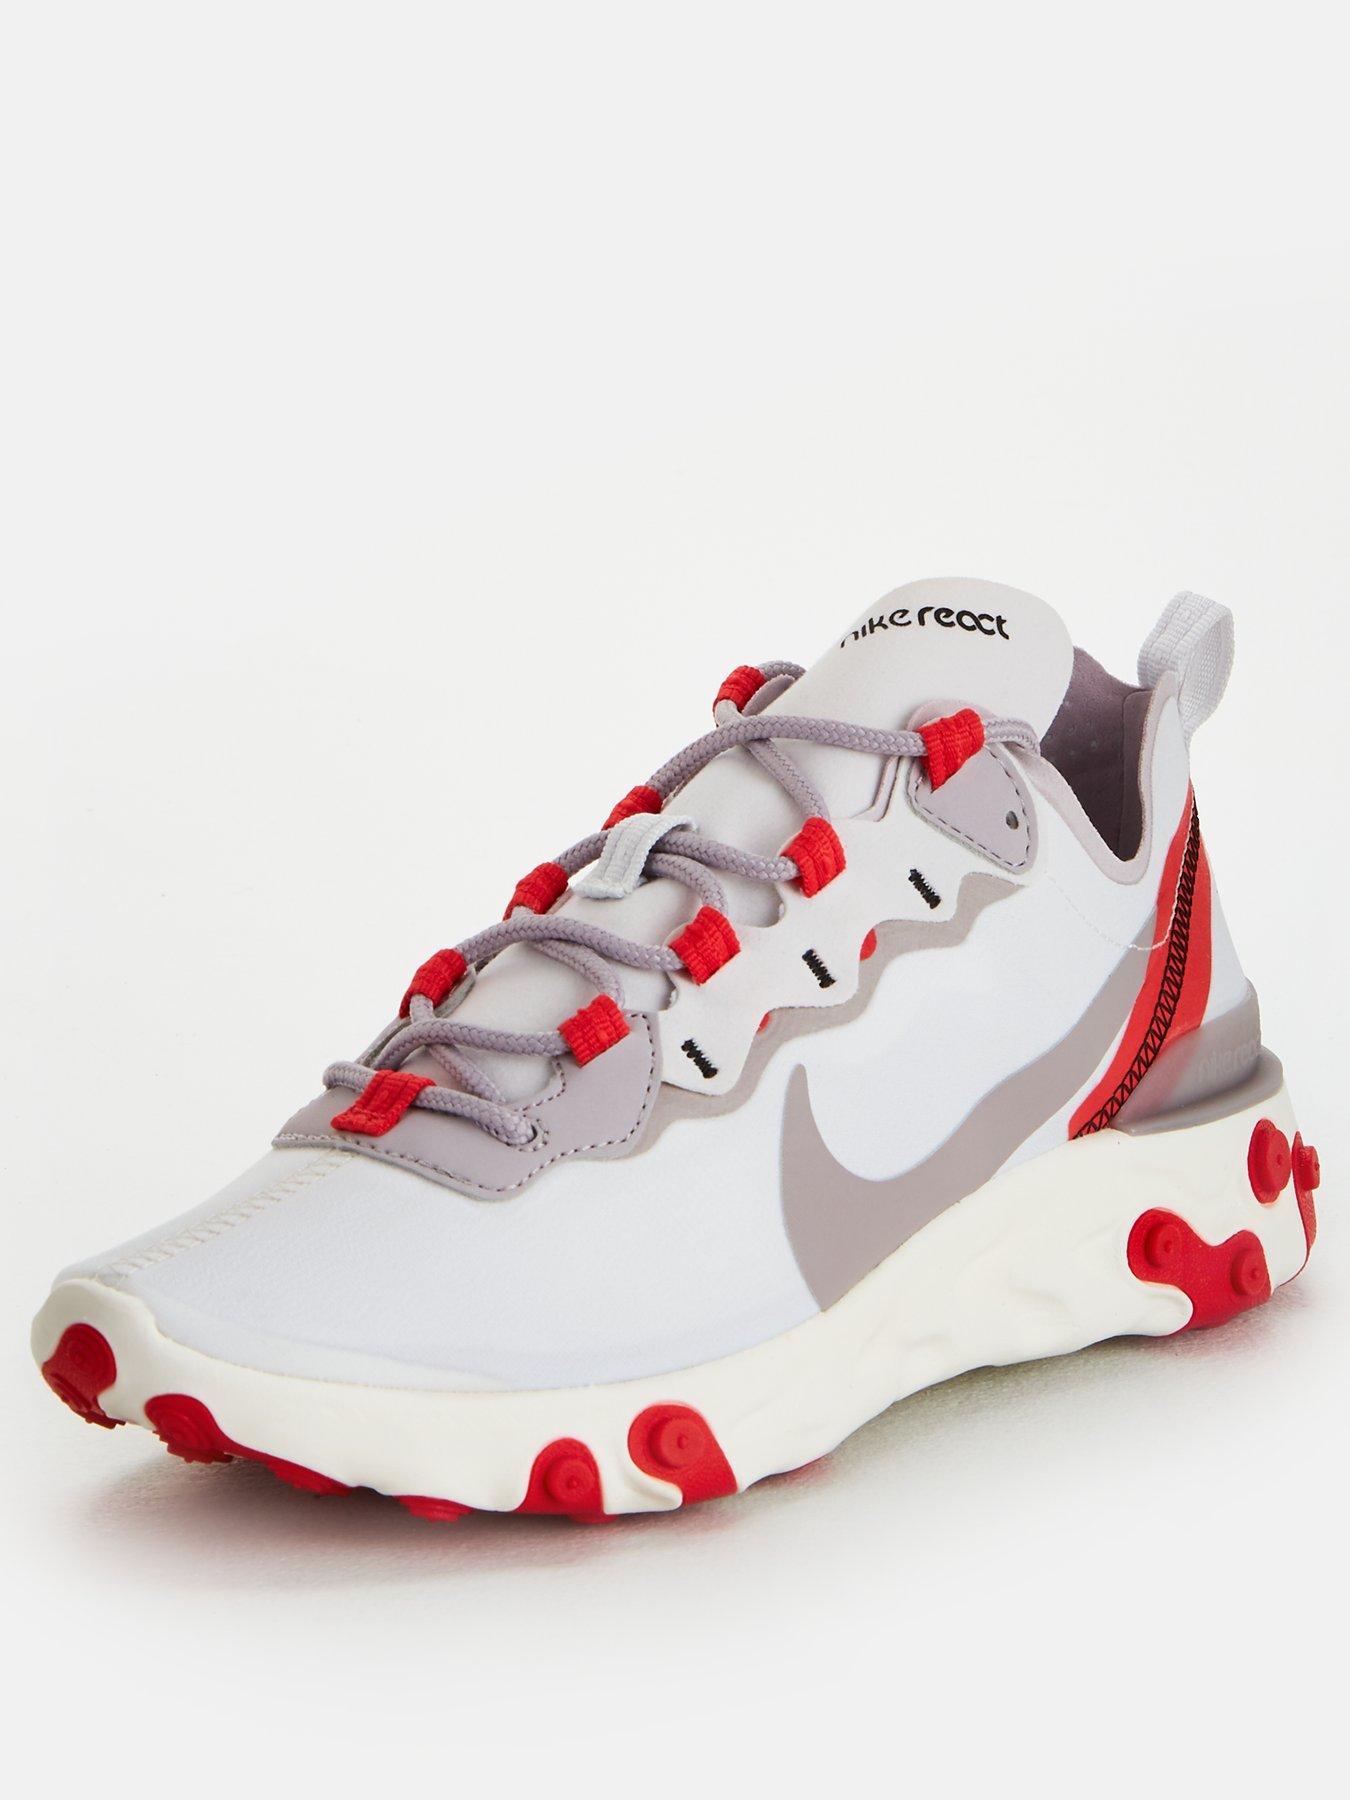 white and red nike react element 55